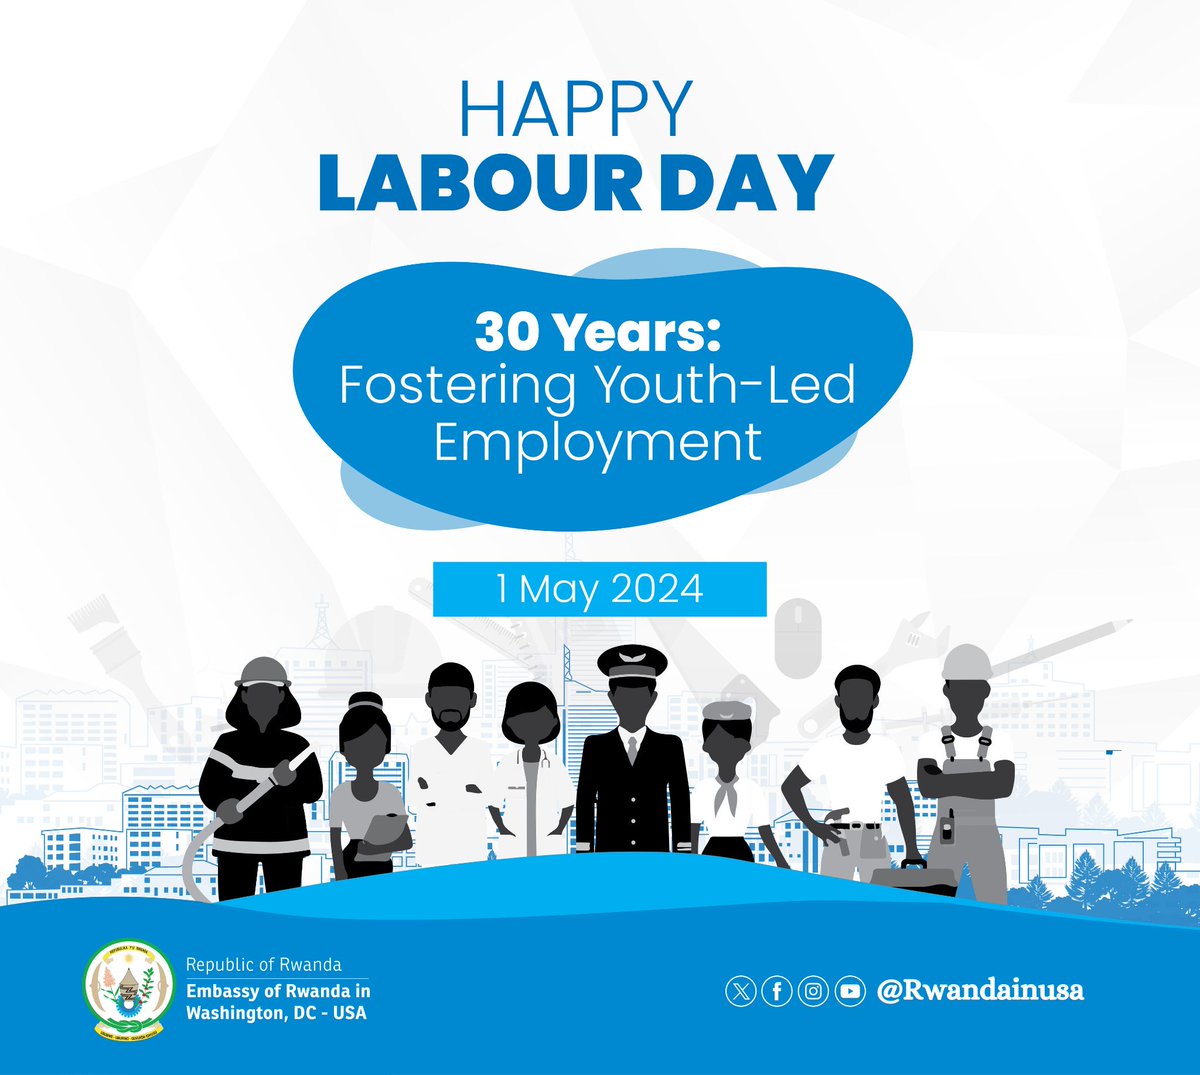 Much appreciation @UnitedStatesRCA for your commitment to joining hands with fellow Rwandans in the promotion of job creation as one of the key pillars in the National Strategy for Transformation of our country #Rwanda #HappyLaborDay